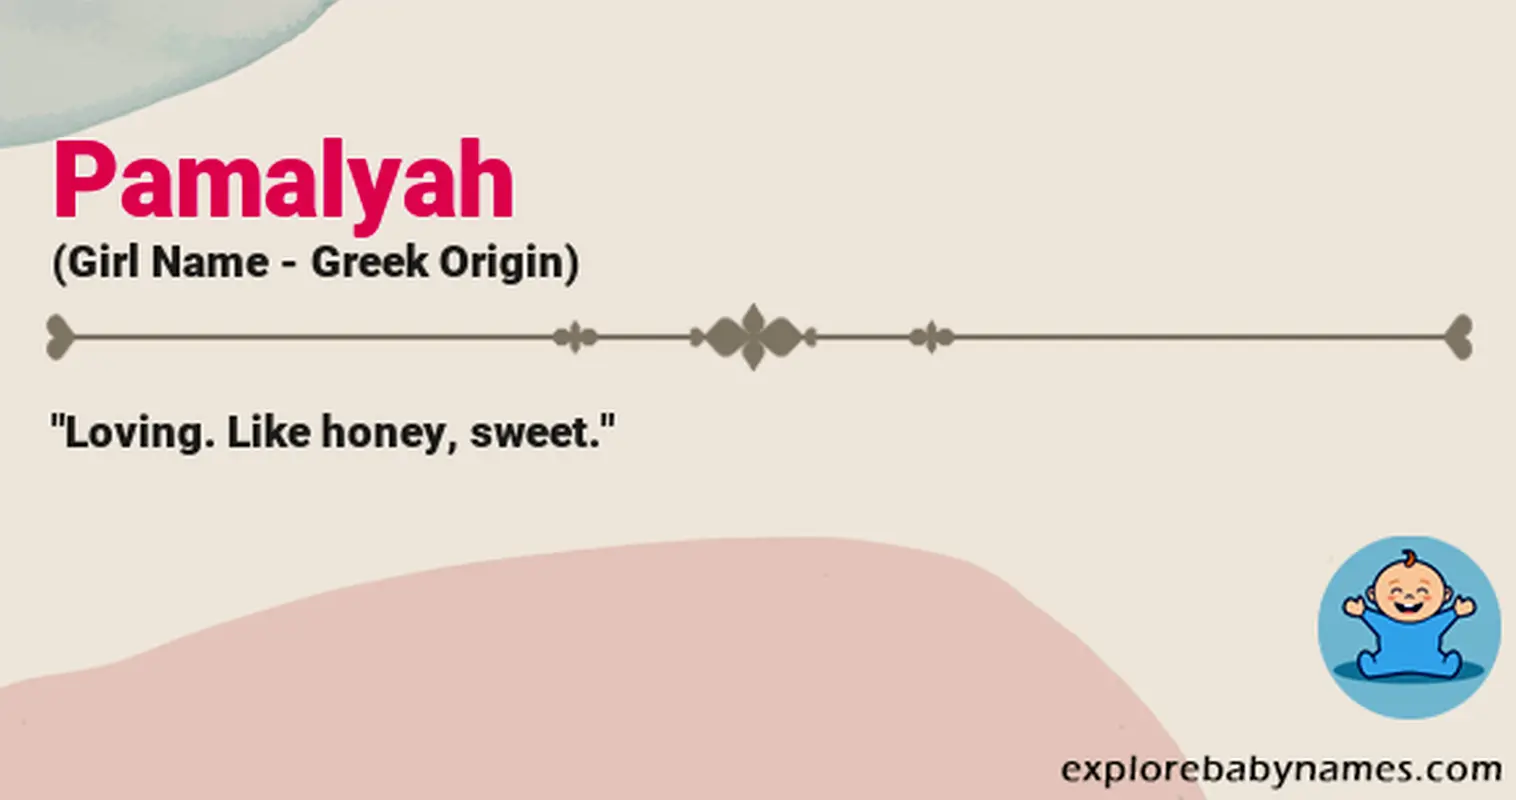 Meaning of Pamalyah